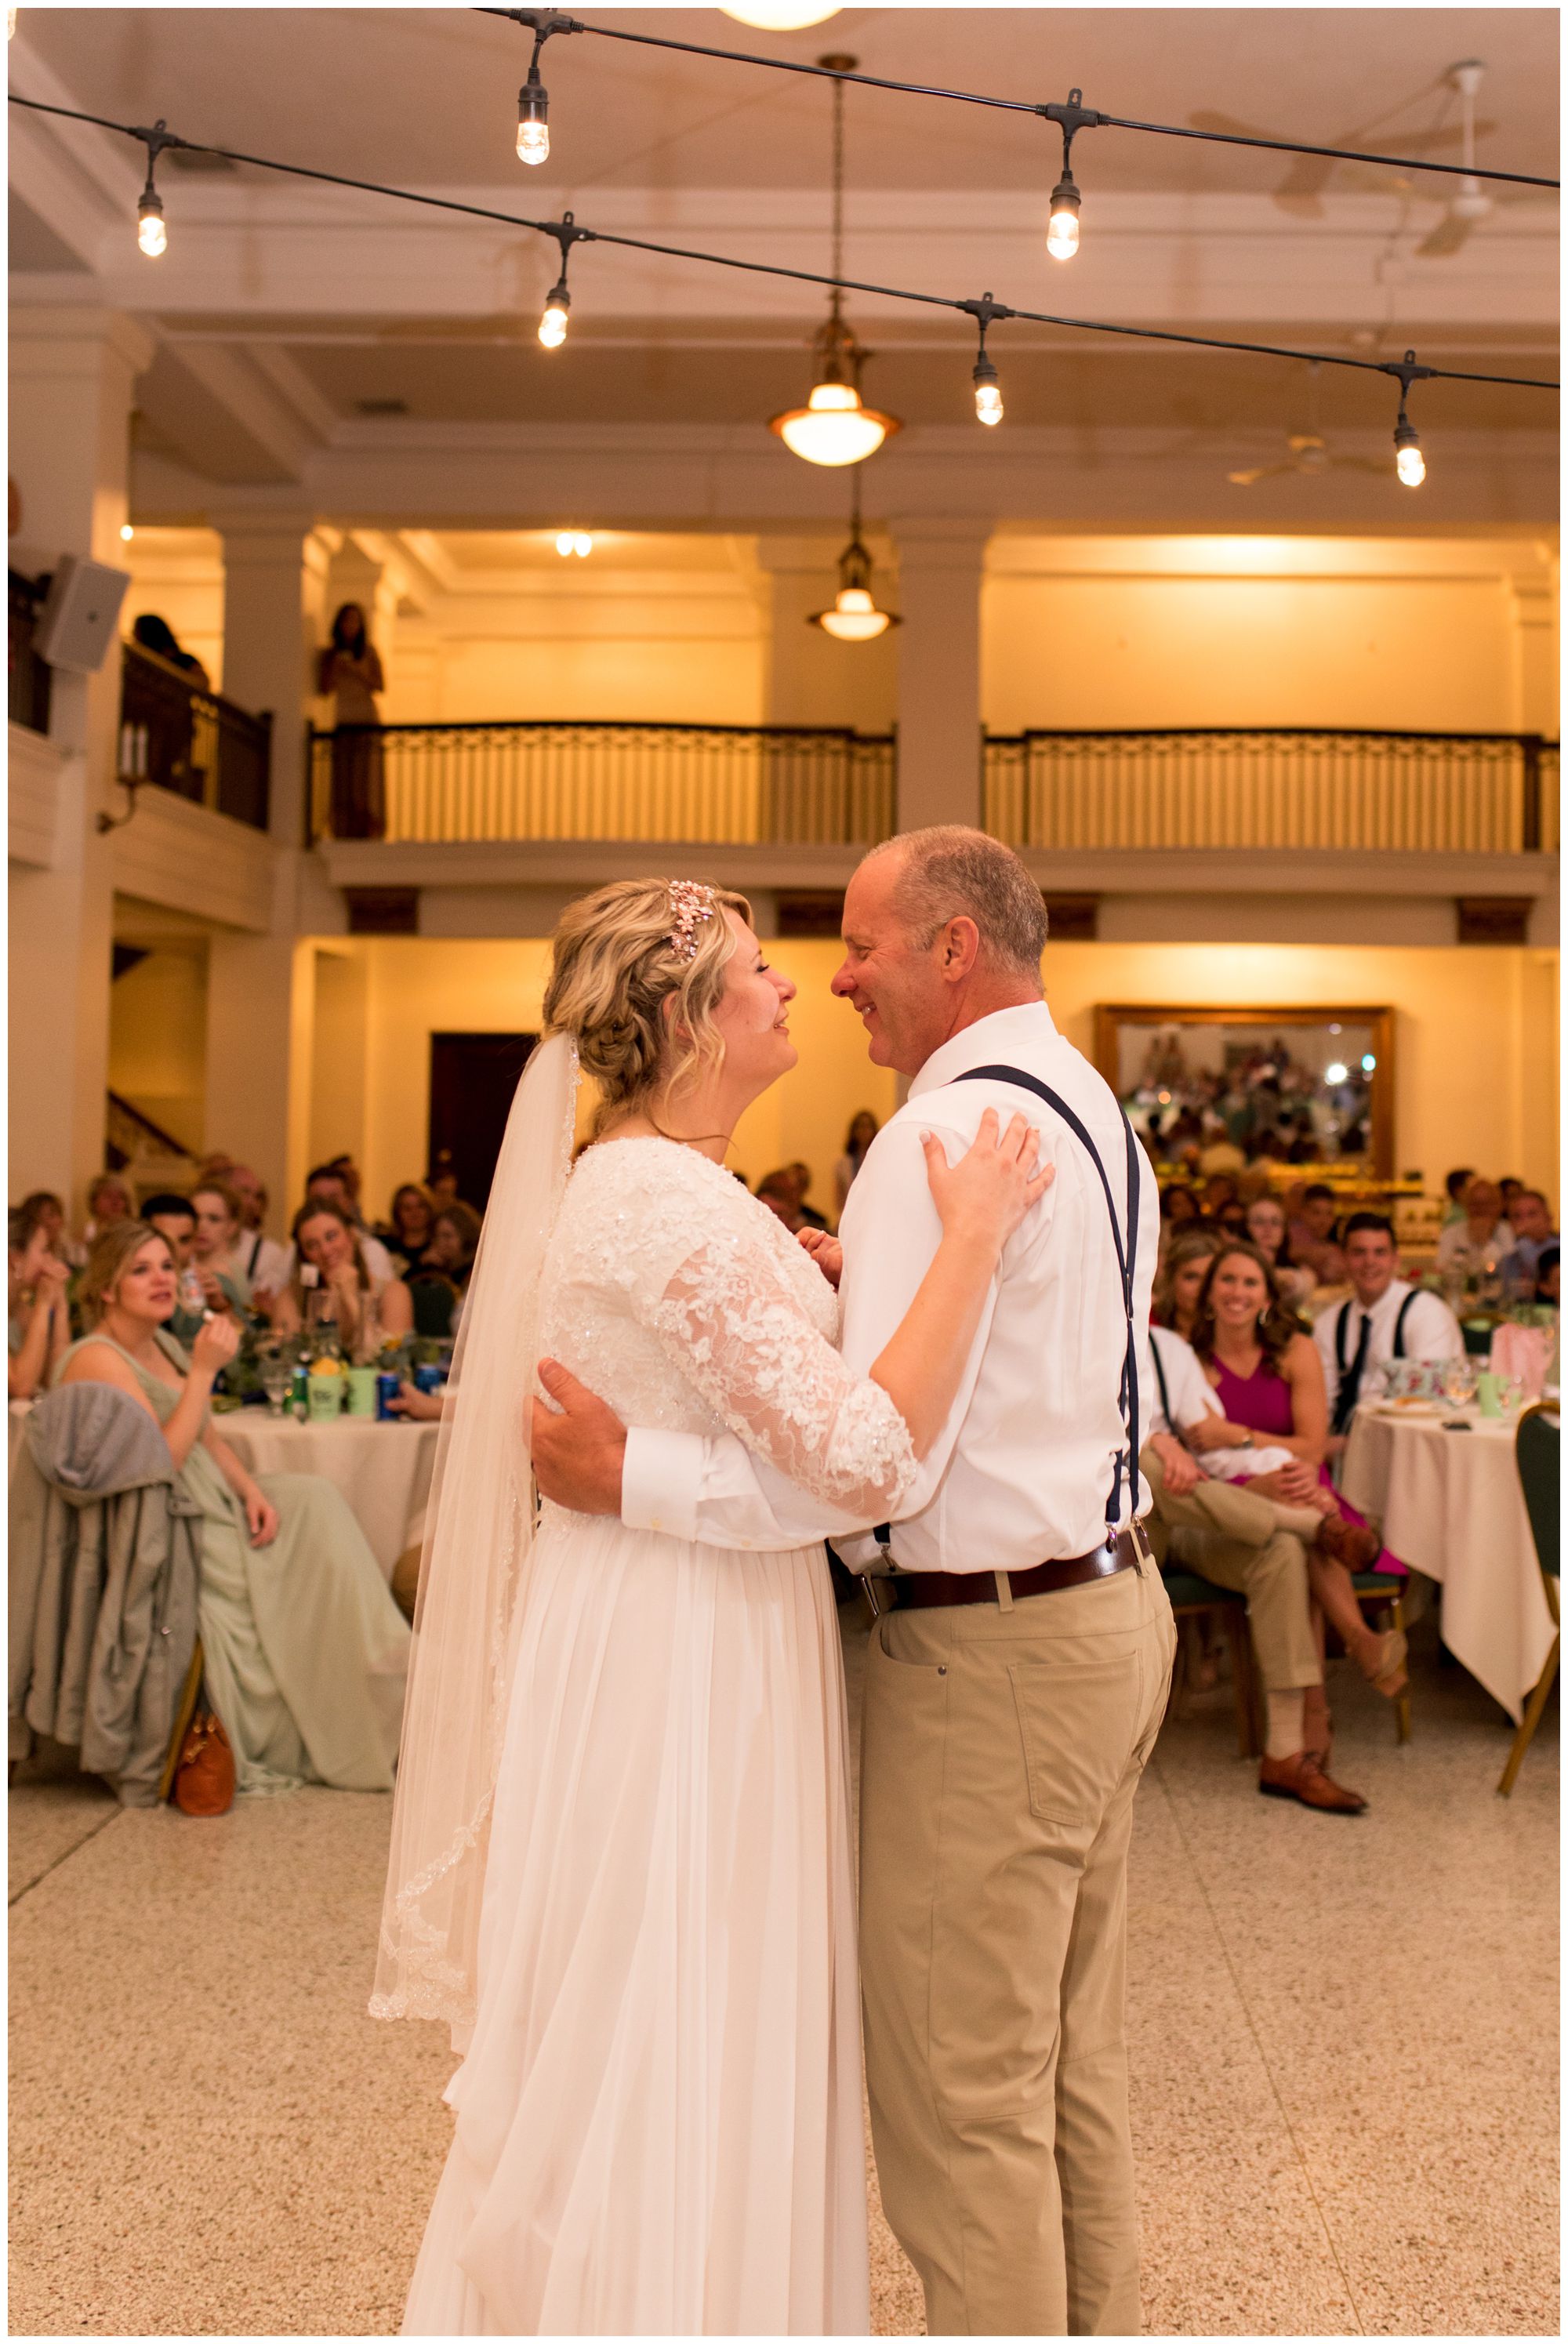 bride and father dance together during wedding reception at Cornerstone Center for the Arts in Muncie Indiana